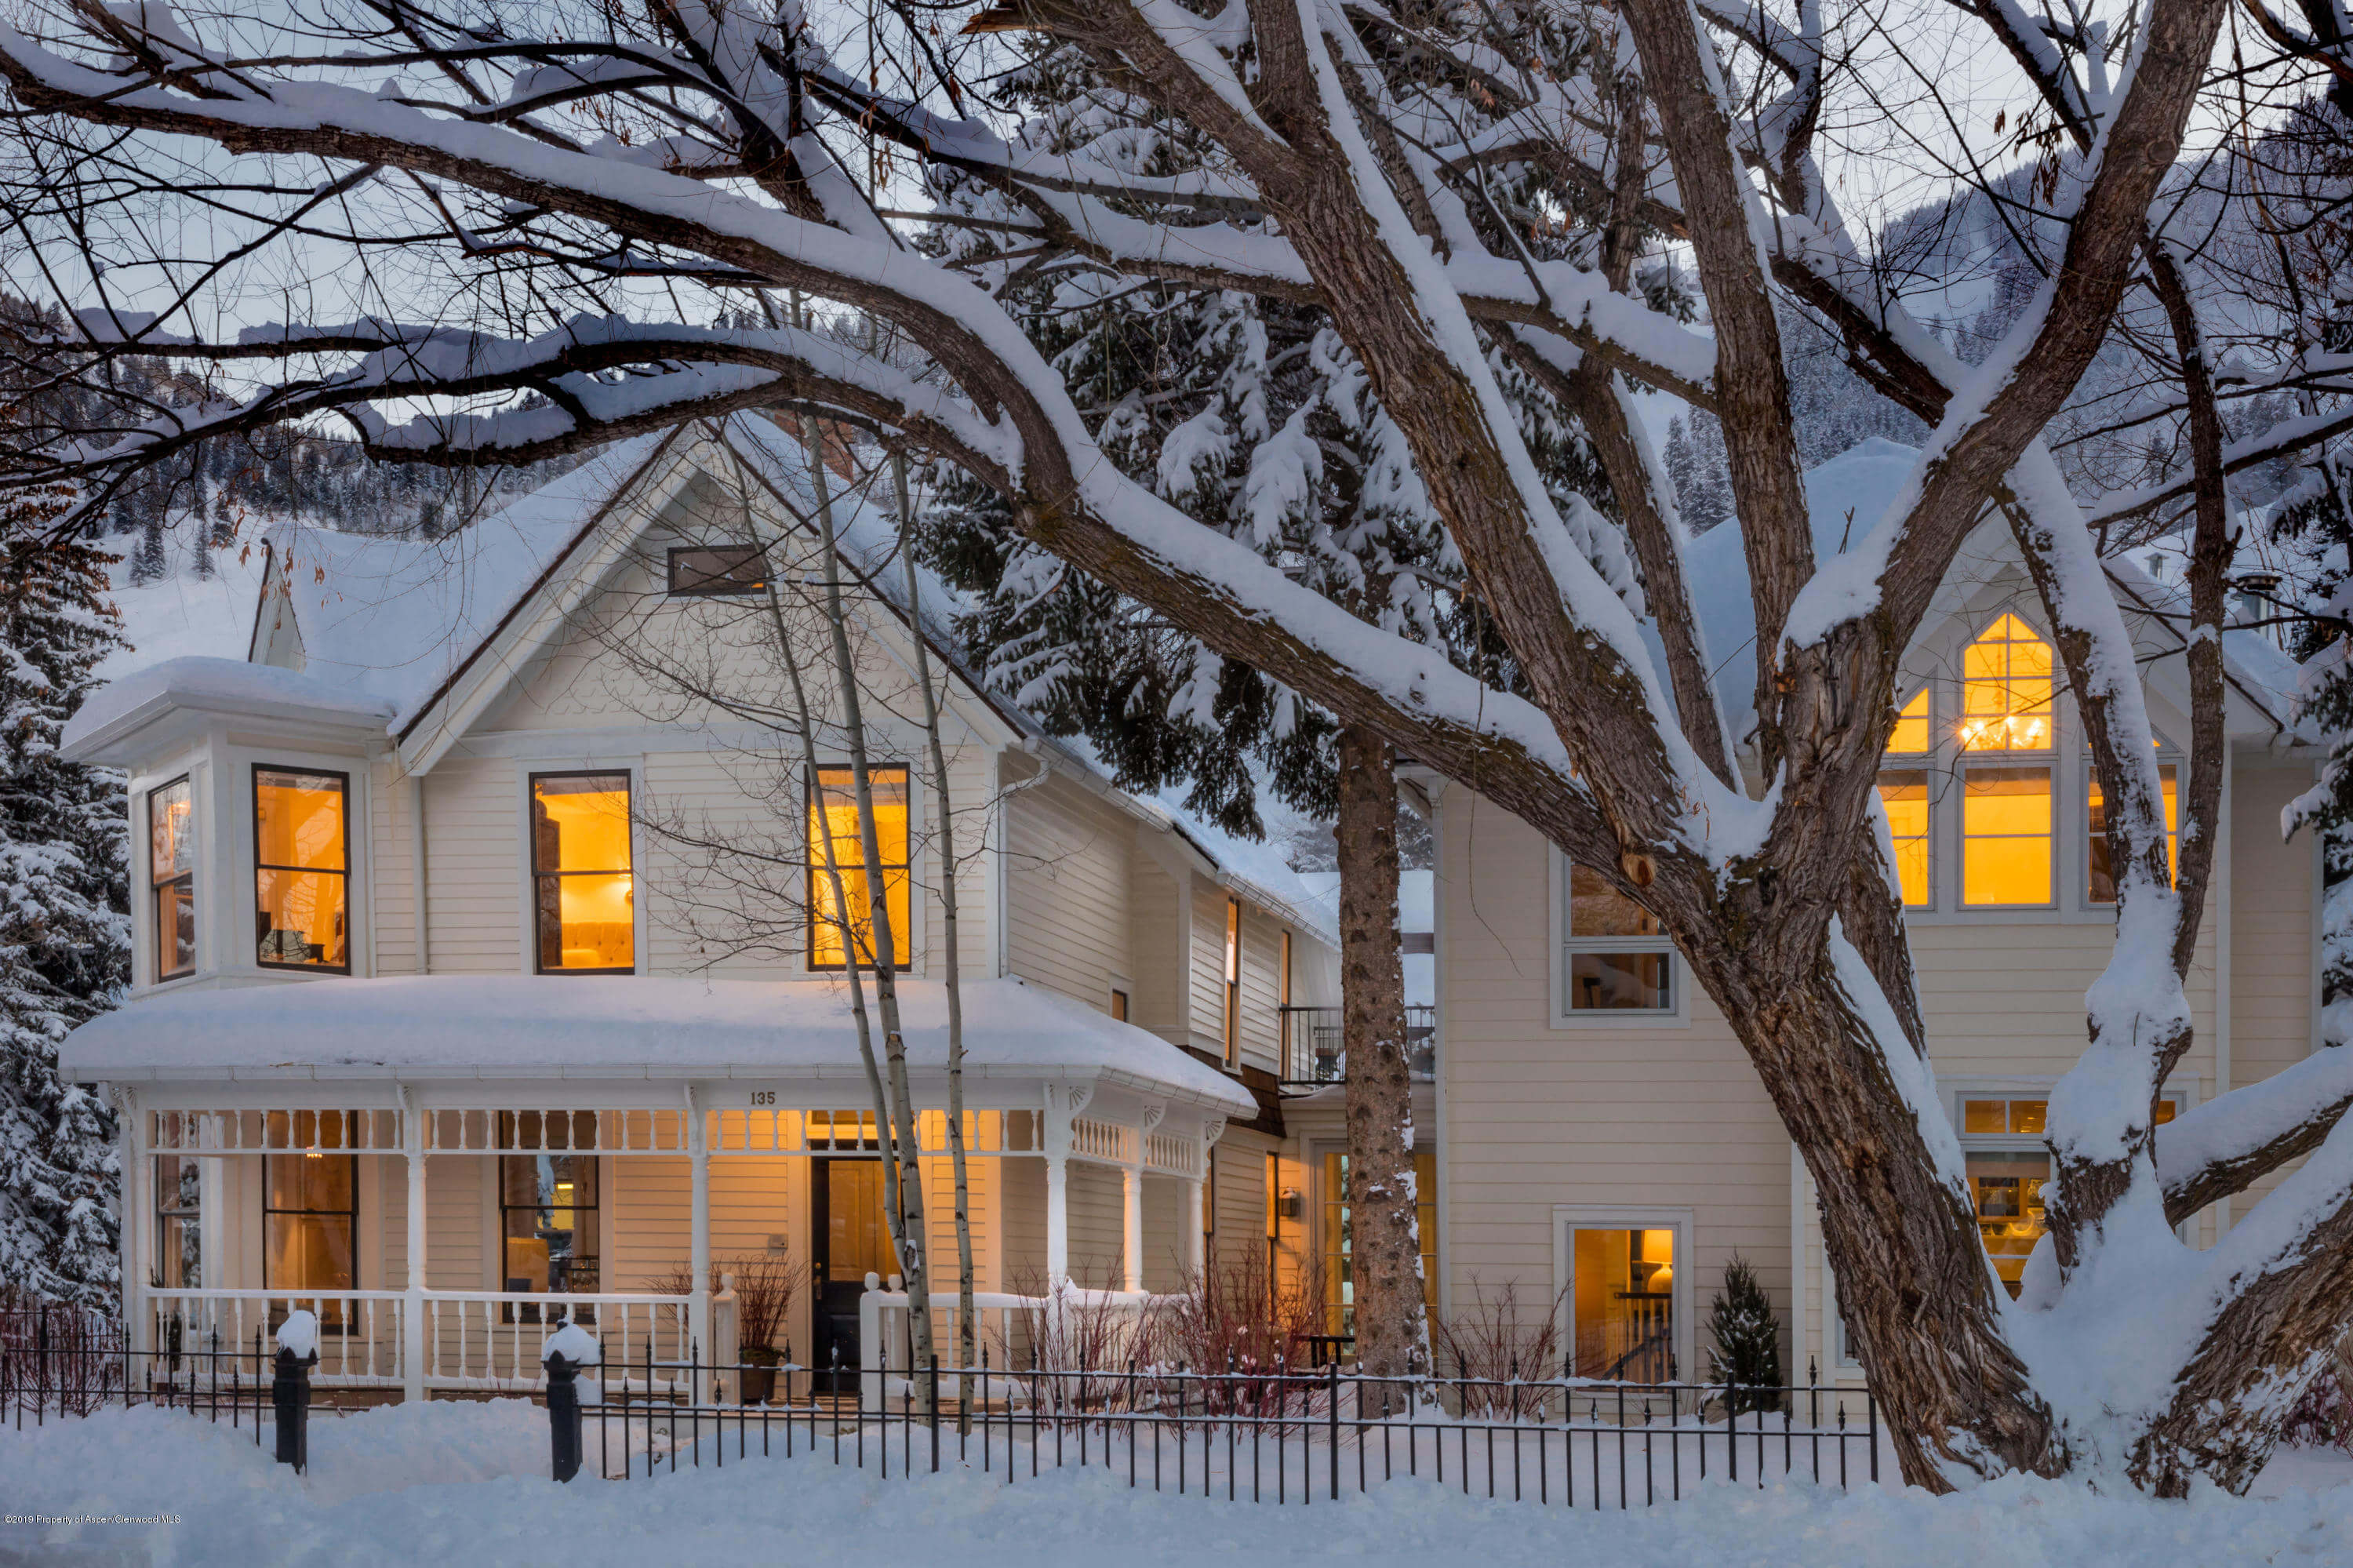 Exquisite 1890/2005 Remodeled 7 Bdrm Aspen Victorian at 135 E Cooper Ave Closes at $21.95M/$3,396 SF Unfurnished Image